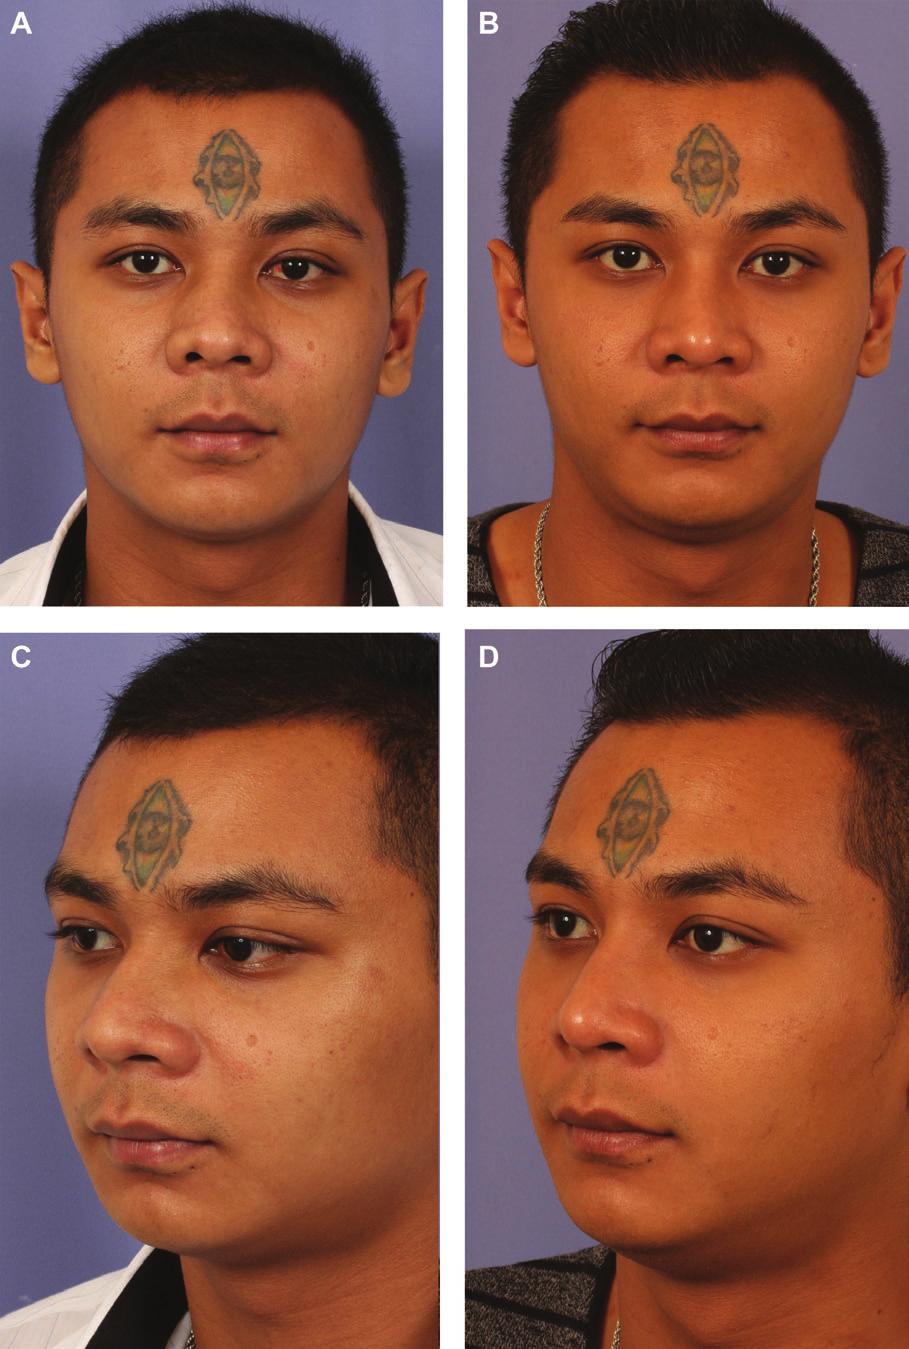 510 Aesthetic Surgery Journal 33(4) Figure 4. (A, C, E) This 21-year-old man was assaulted and sustained a nasal facture and deviation causing a blocked airway.